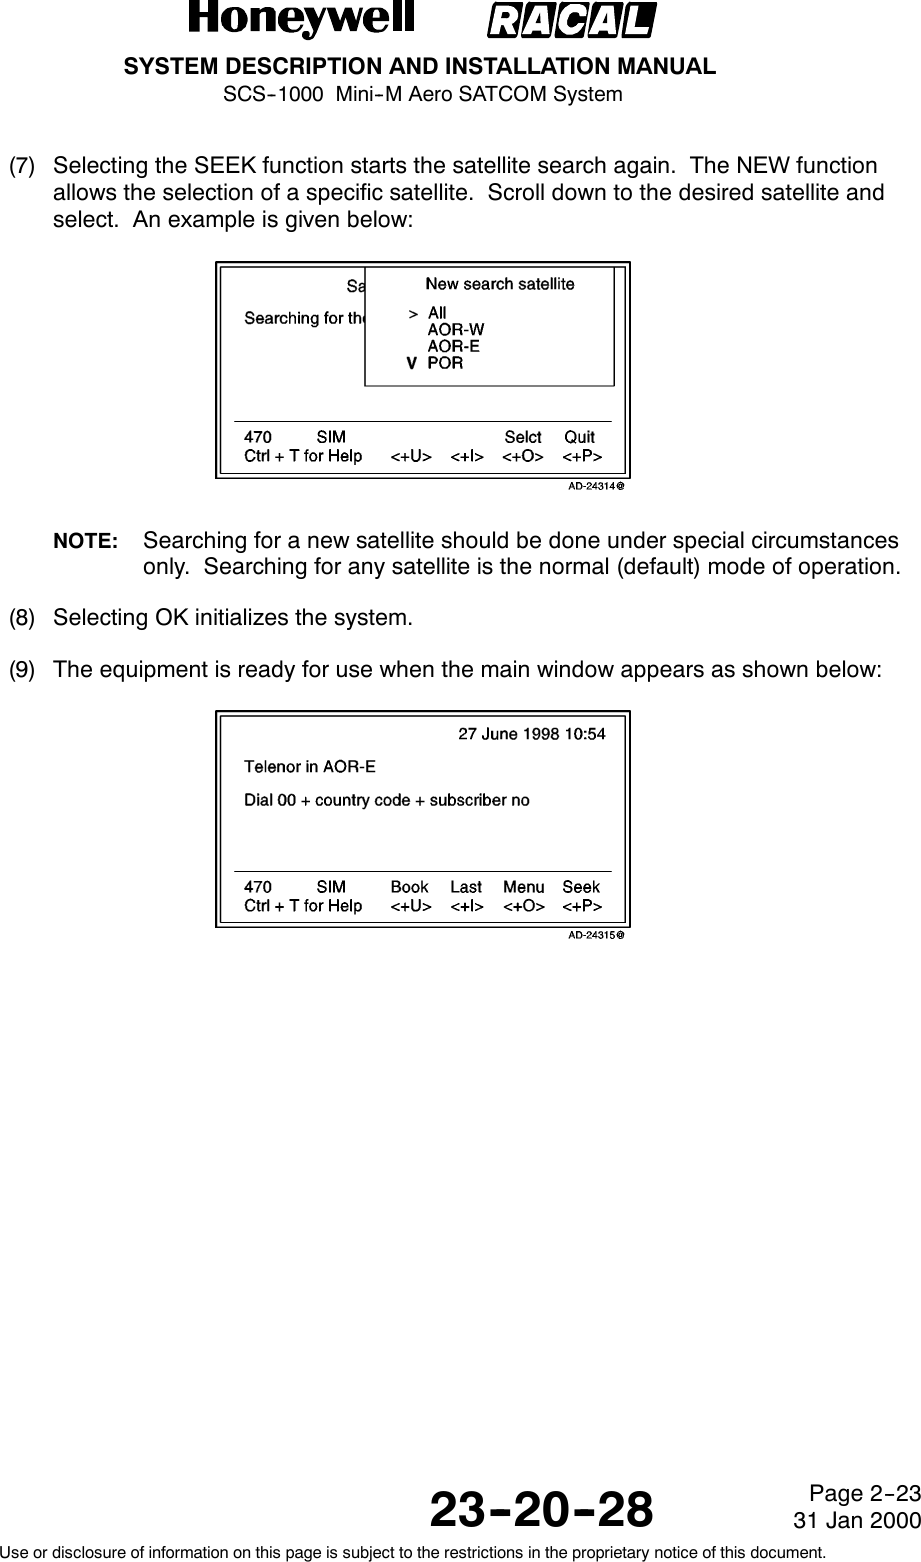 SYSTEM DESCRIPTION AND INSTALLATION MANUALSCS--1000 Mini--M Aero SATCOM System23--20--28Use or disclosure of information on this page is subject to the restrictions in the proprietary notice of this document.Page 2--2331 Jan 2000(7) Selecting the SEEK function starts the satellite search again. The NEW functionallows the selection of a specific satellite. Scroll down to the desired satellite andselect. An example is given below:NOTE: Searching for a new satellite should be done under special circumstancesonly. Searching for any satellite is the normal (default) mode of operation.(8) Selecting OK initializes the system.(9) The equipment is ready for use when the main window appears as shown below: